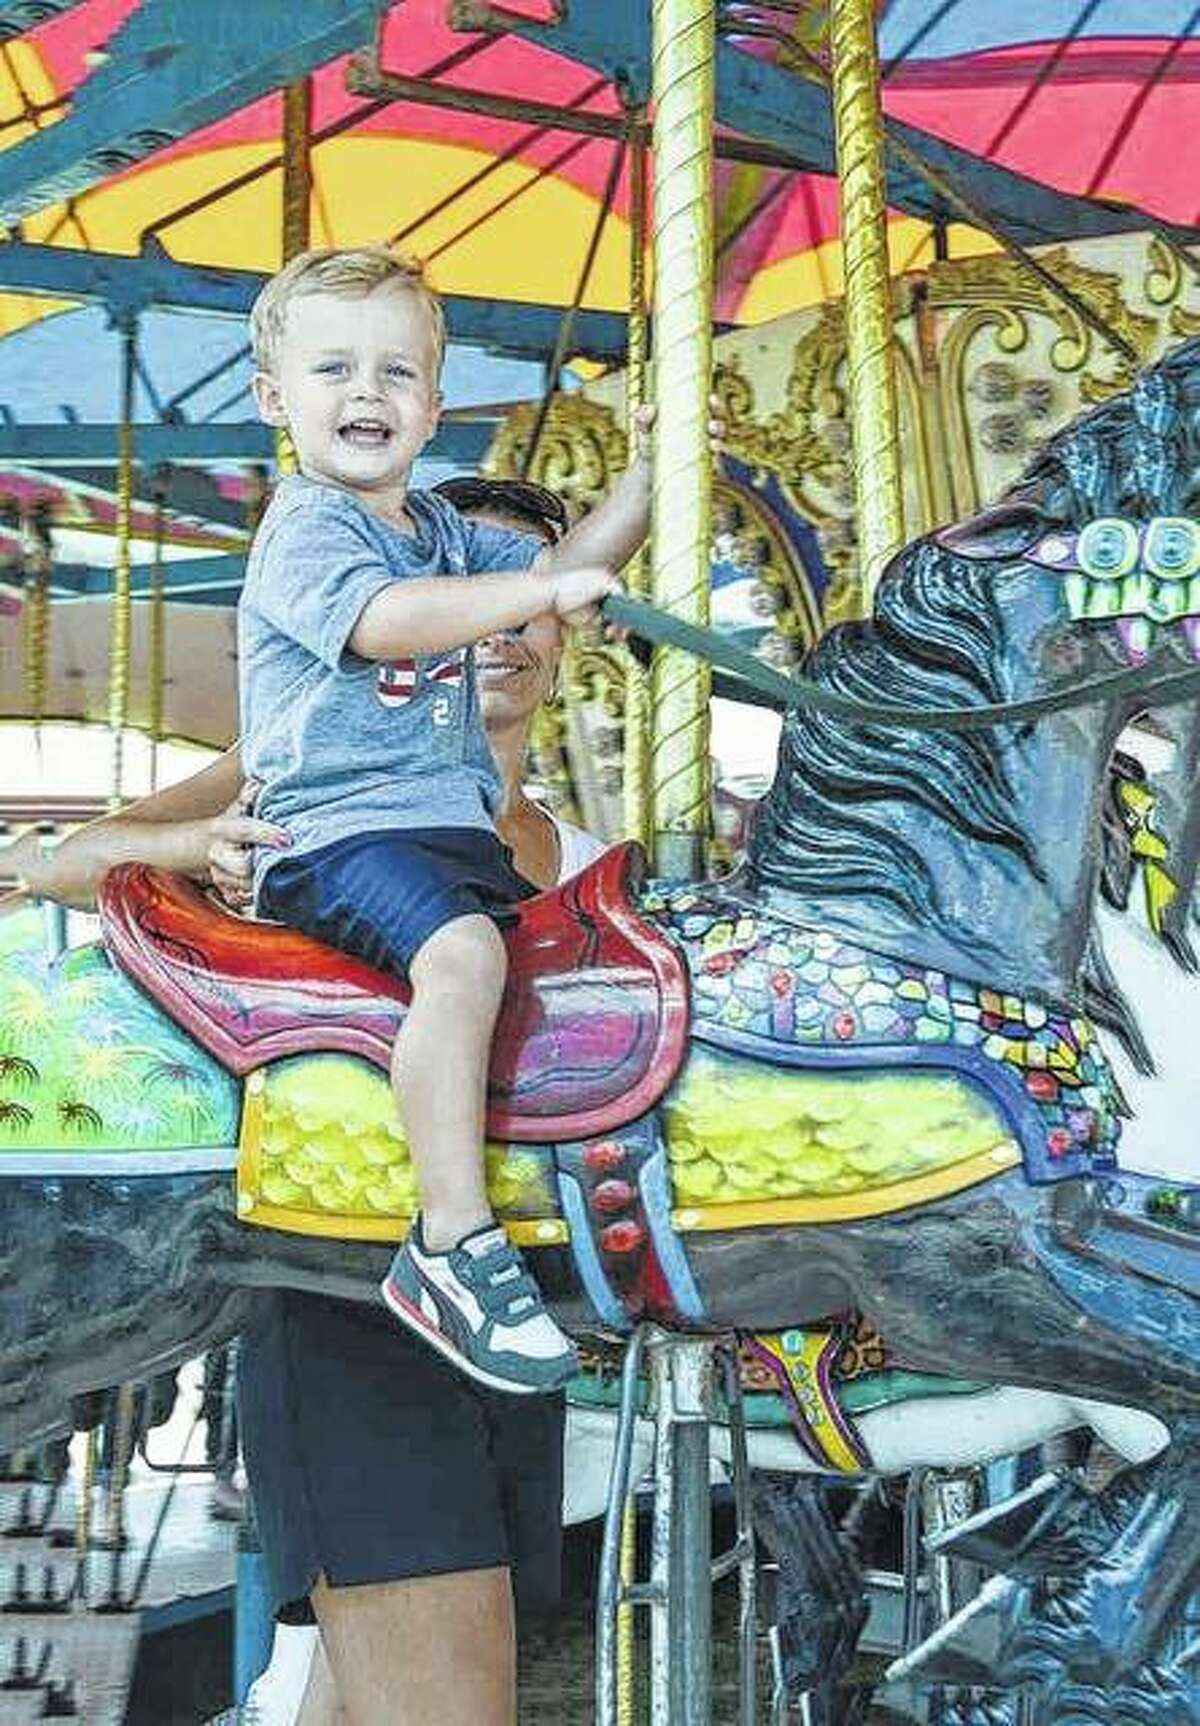 Ryker Foster of Jacksonville enjoys a ride on the carousel at the Illinois State Fair in Springfield.